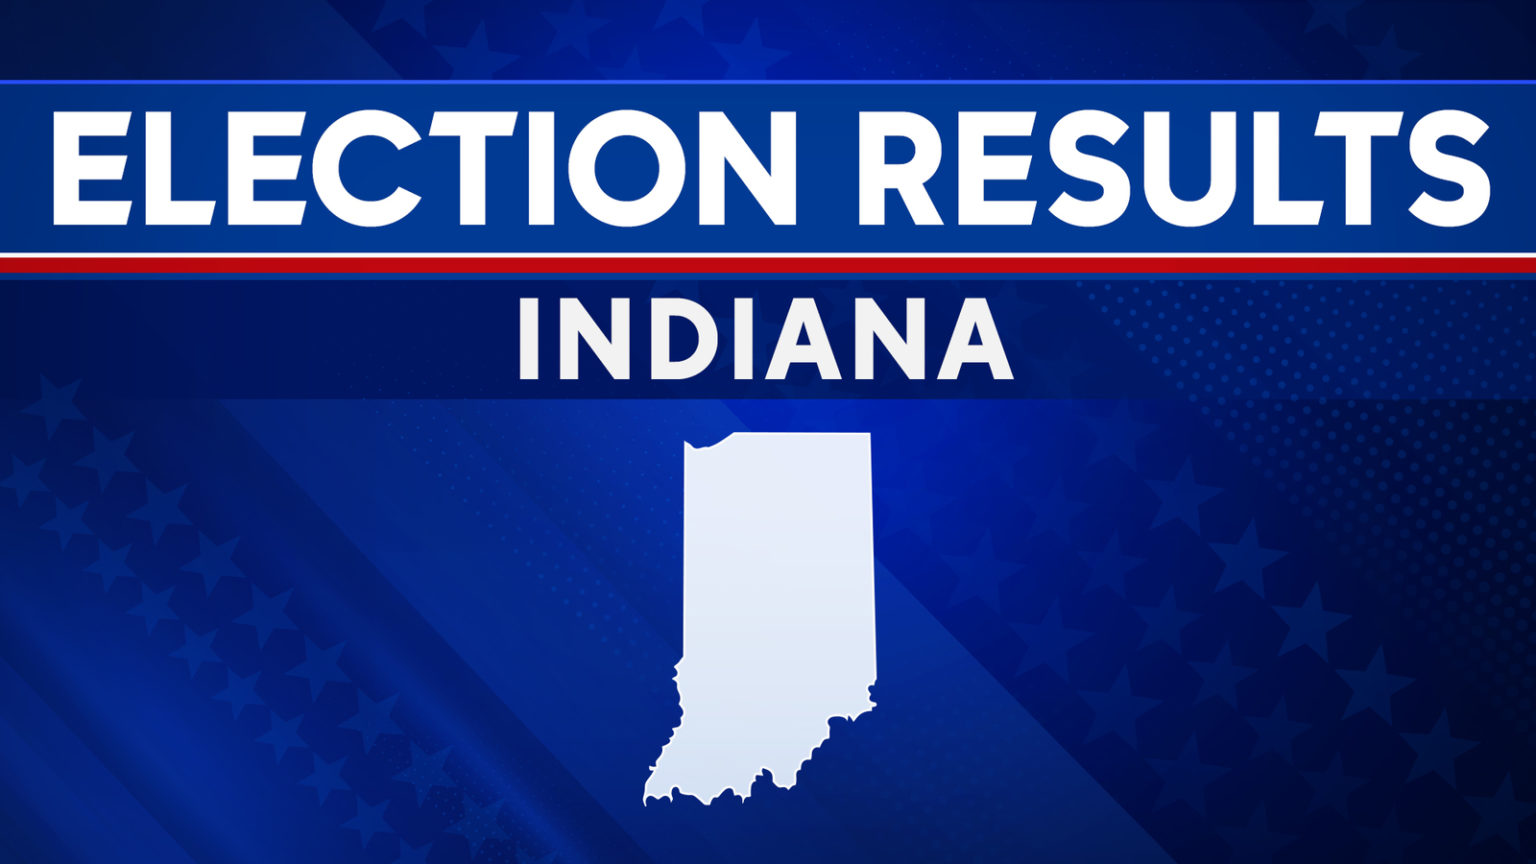 Indiana election results 2020 Electoral college votes, who won CBNC